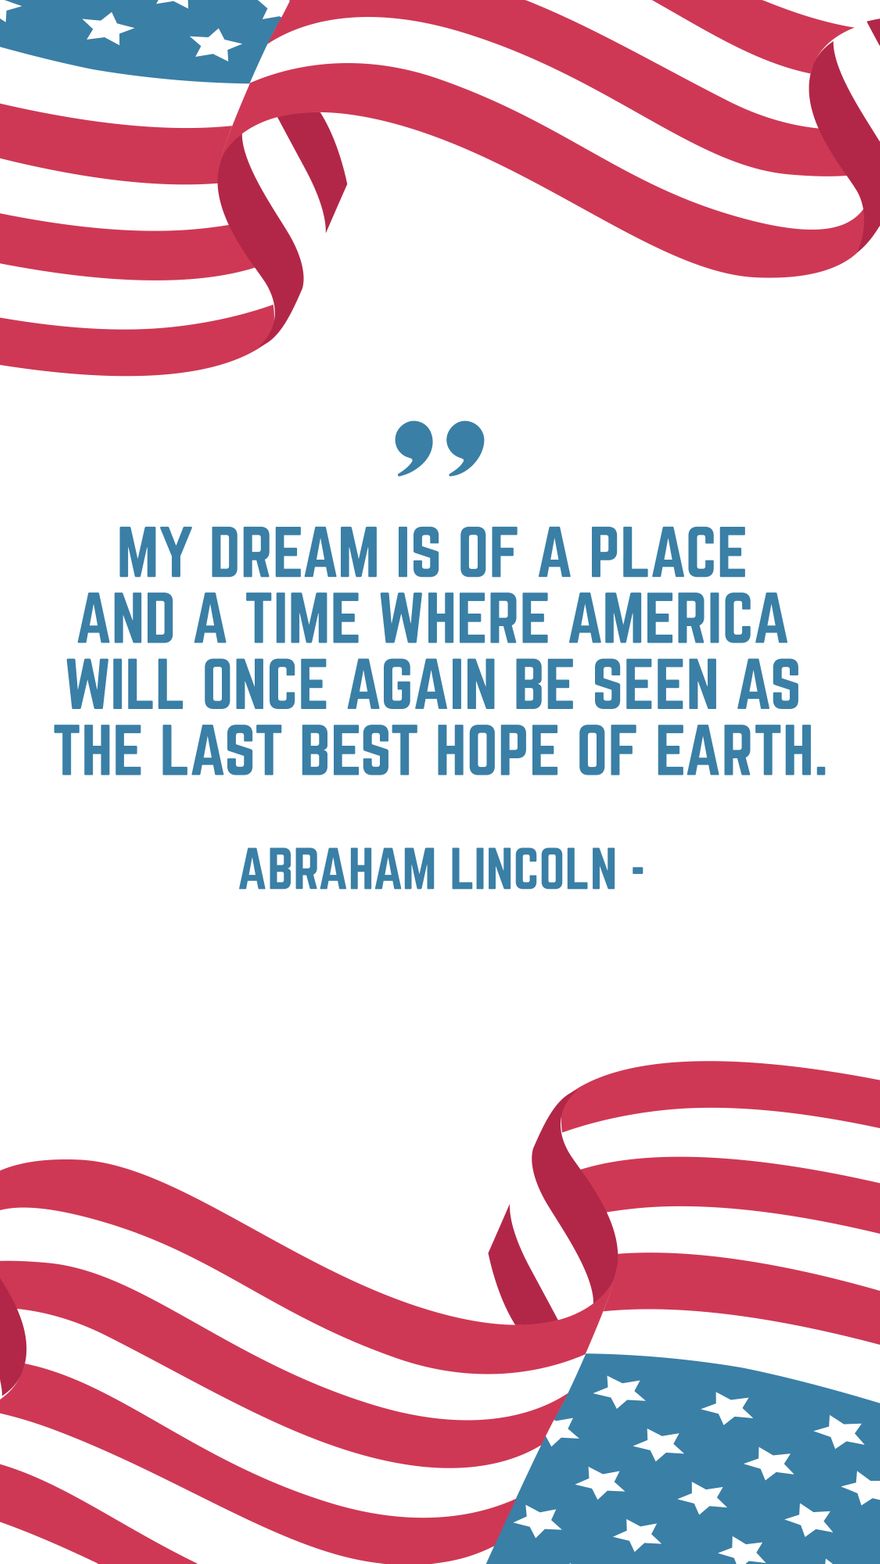 Abraham Lincoln - My dream is of a place and a time where America will once again be seen as the last best hope of earth. in JPG